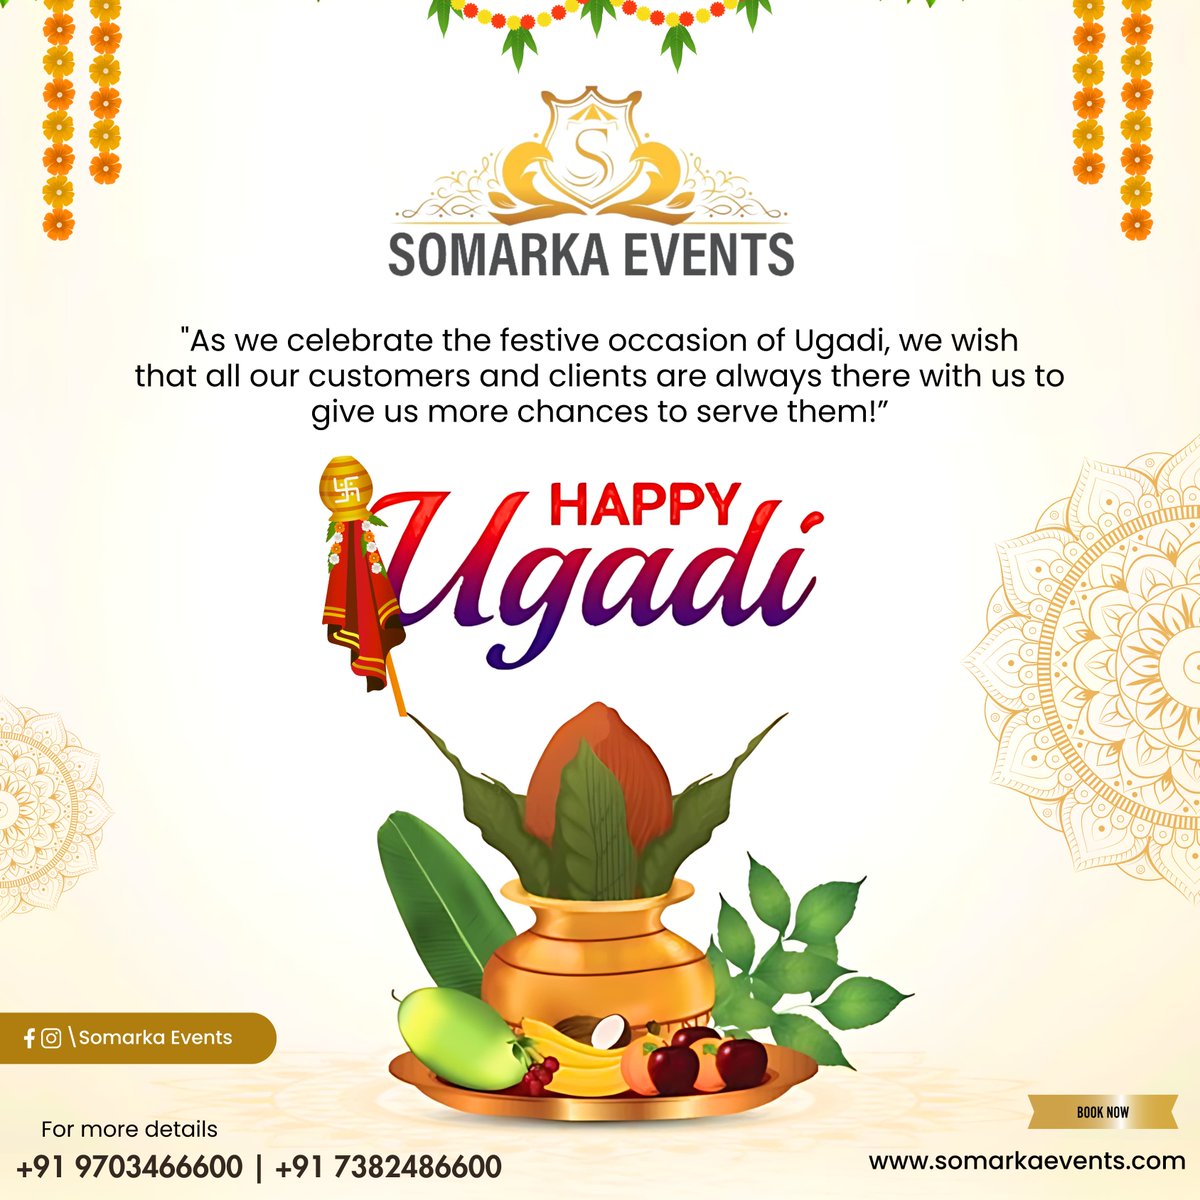 Ugadi marks the beginning of a new and auspicious journey, where the sweet melodies of life harmonize with the rhythms of hope. . Happy Ugadi

📞 Contact Numbers: +91 97034 66600 | +91 73824 86600

#SomarkaEvents #UgadiFestival #BestEventDesigners #BestEventOrganisation